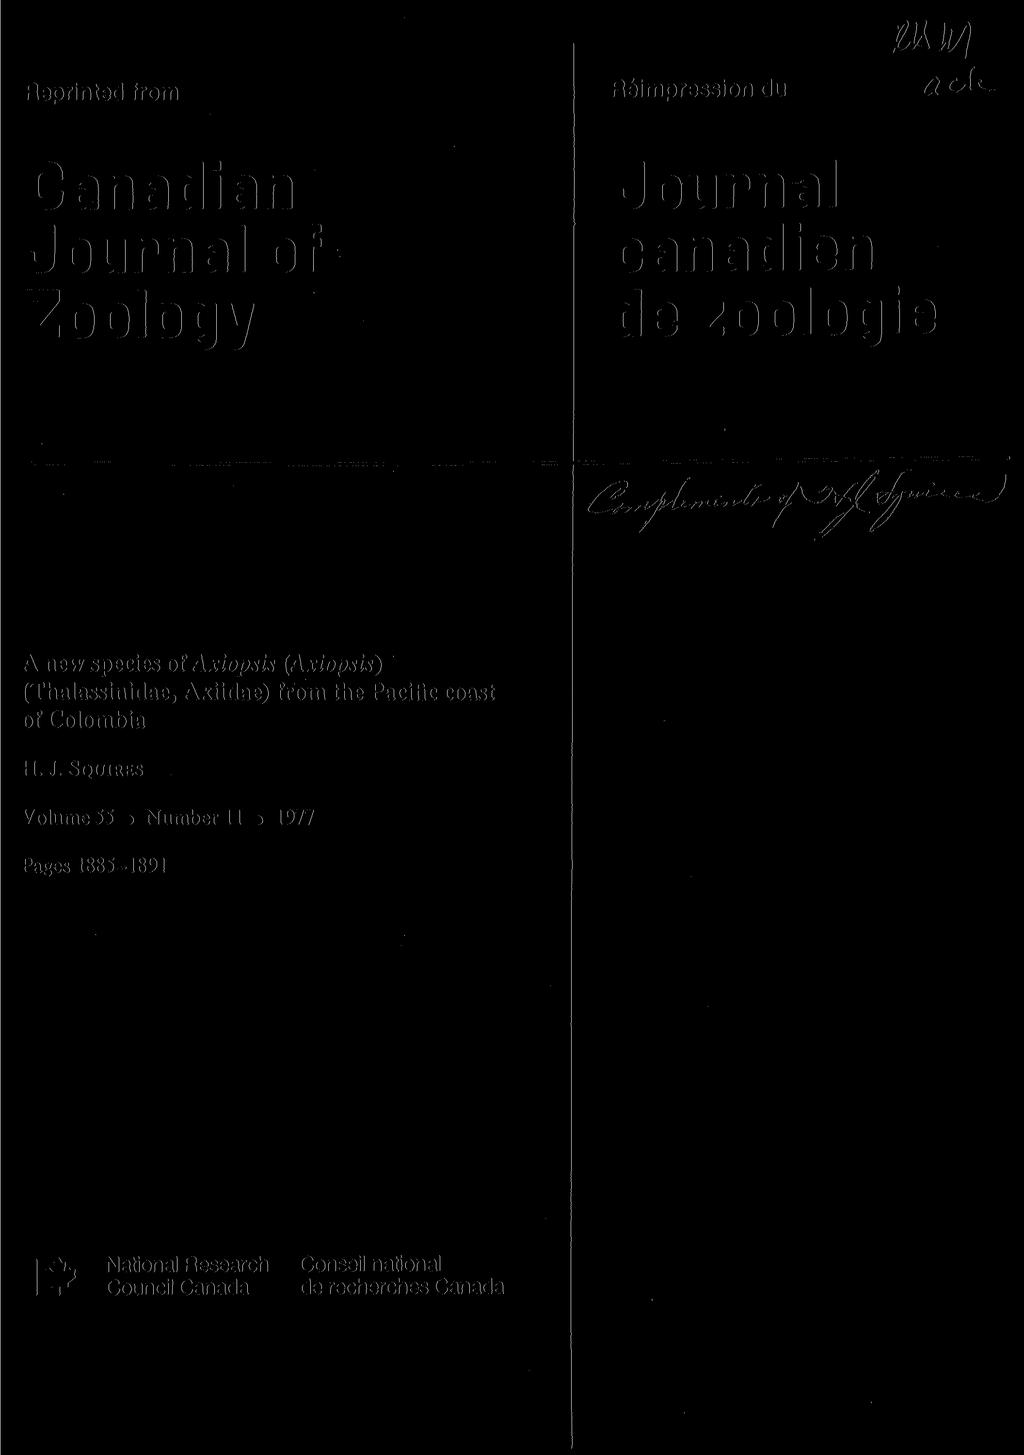 Reprinted from Reimpression du mk/j aou Canadian Journal of Zoology Journal canadien de zoologie r // ^ A new species of Axiopsis (Axiopsis) (Thalassinidae,